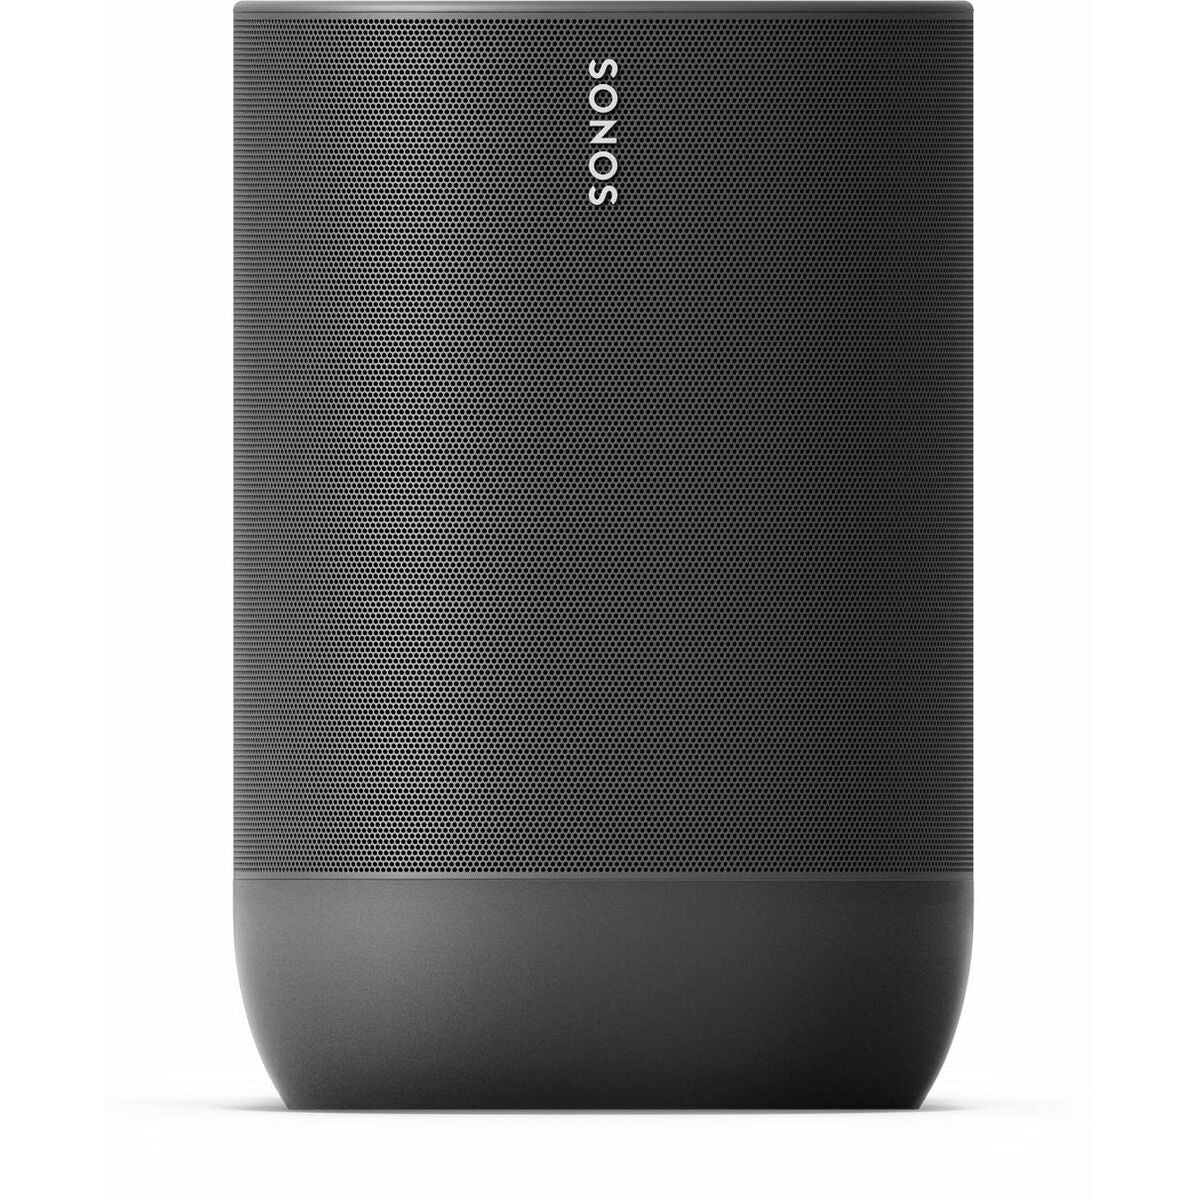 Wireless Bluetooth Speaker ALL IN ONE, Sonos, Electronics, Radio communication, wireless-bluetooth-speaker-all-in-one, Brand_Sonos, category-reference-2609, category-reference-2637, category-reference-2882, category-reference-t-16442, category-reference-t-16443, category-reference-t-19653, cinema and television, Condition_NEW, entertainment, music, Price_400 - 500, RiotNook